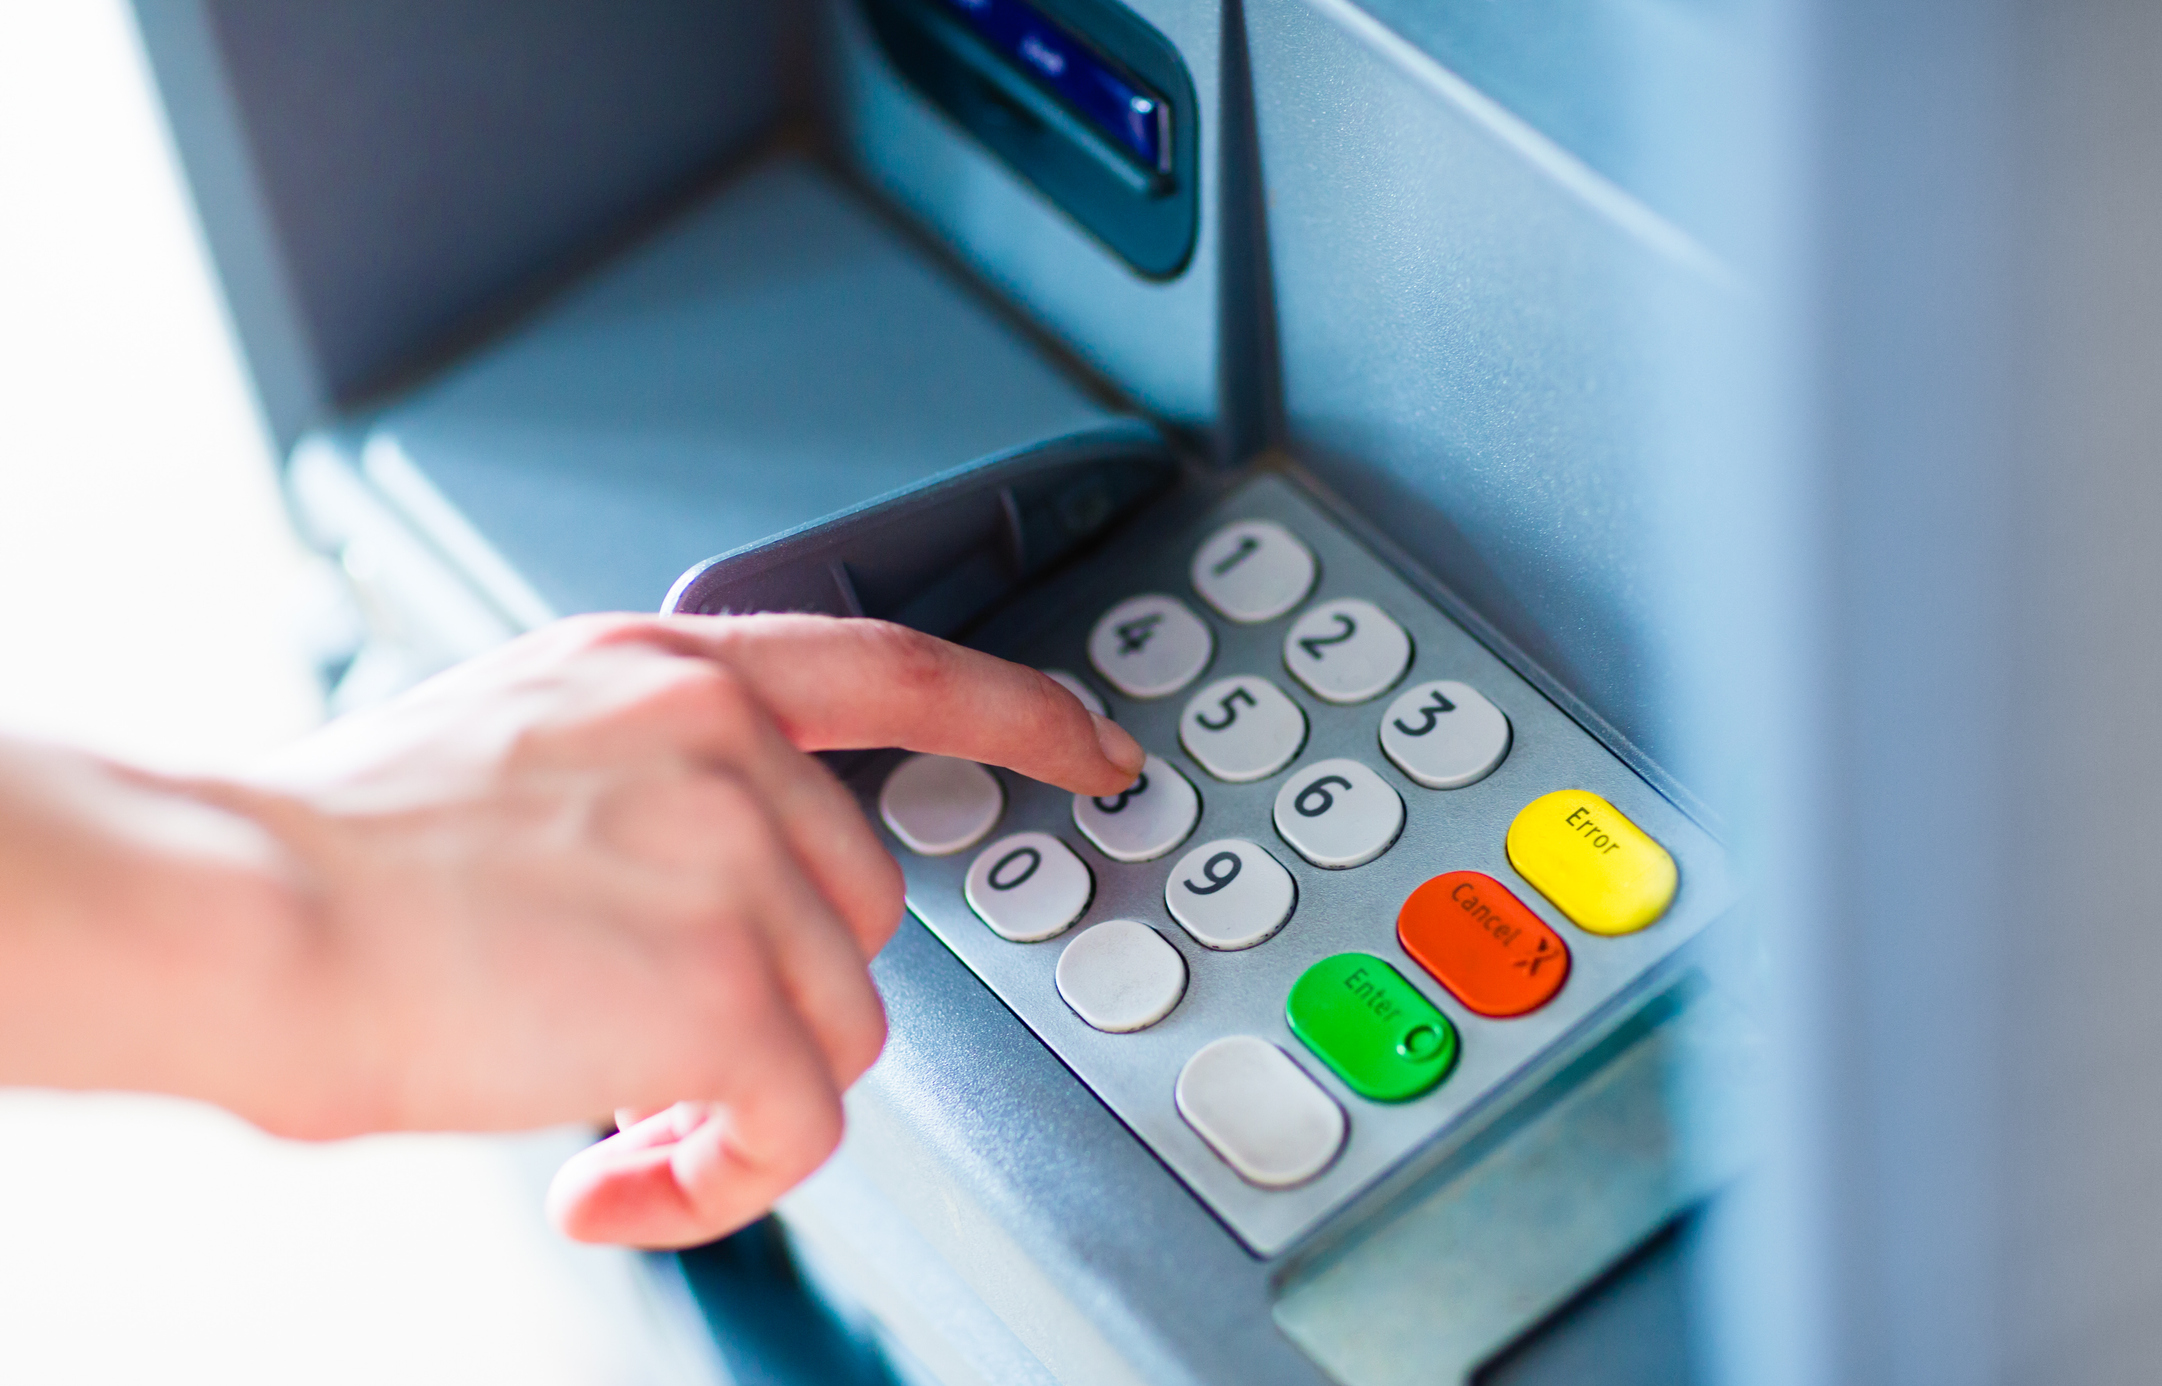 Holiday Shopping Safety - ATMs